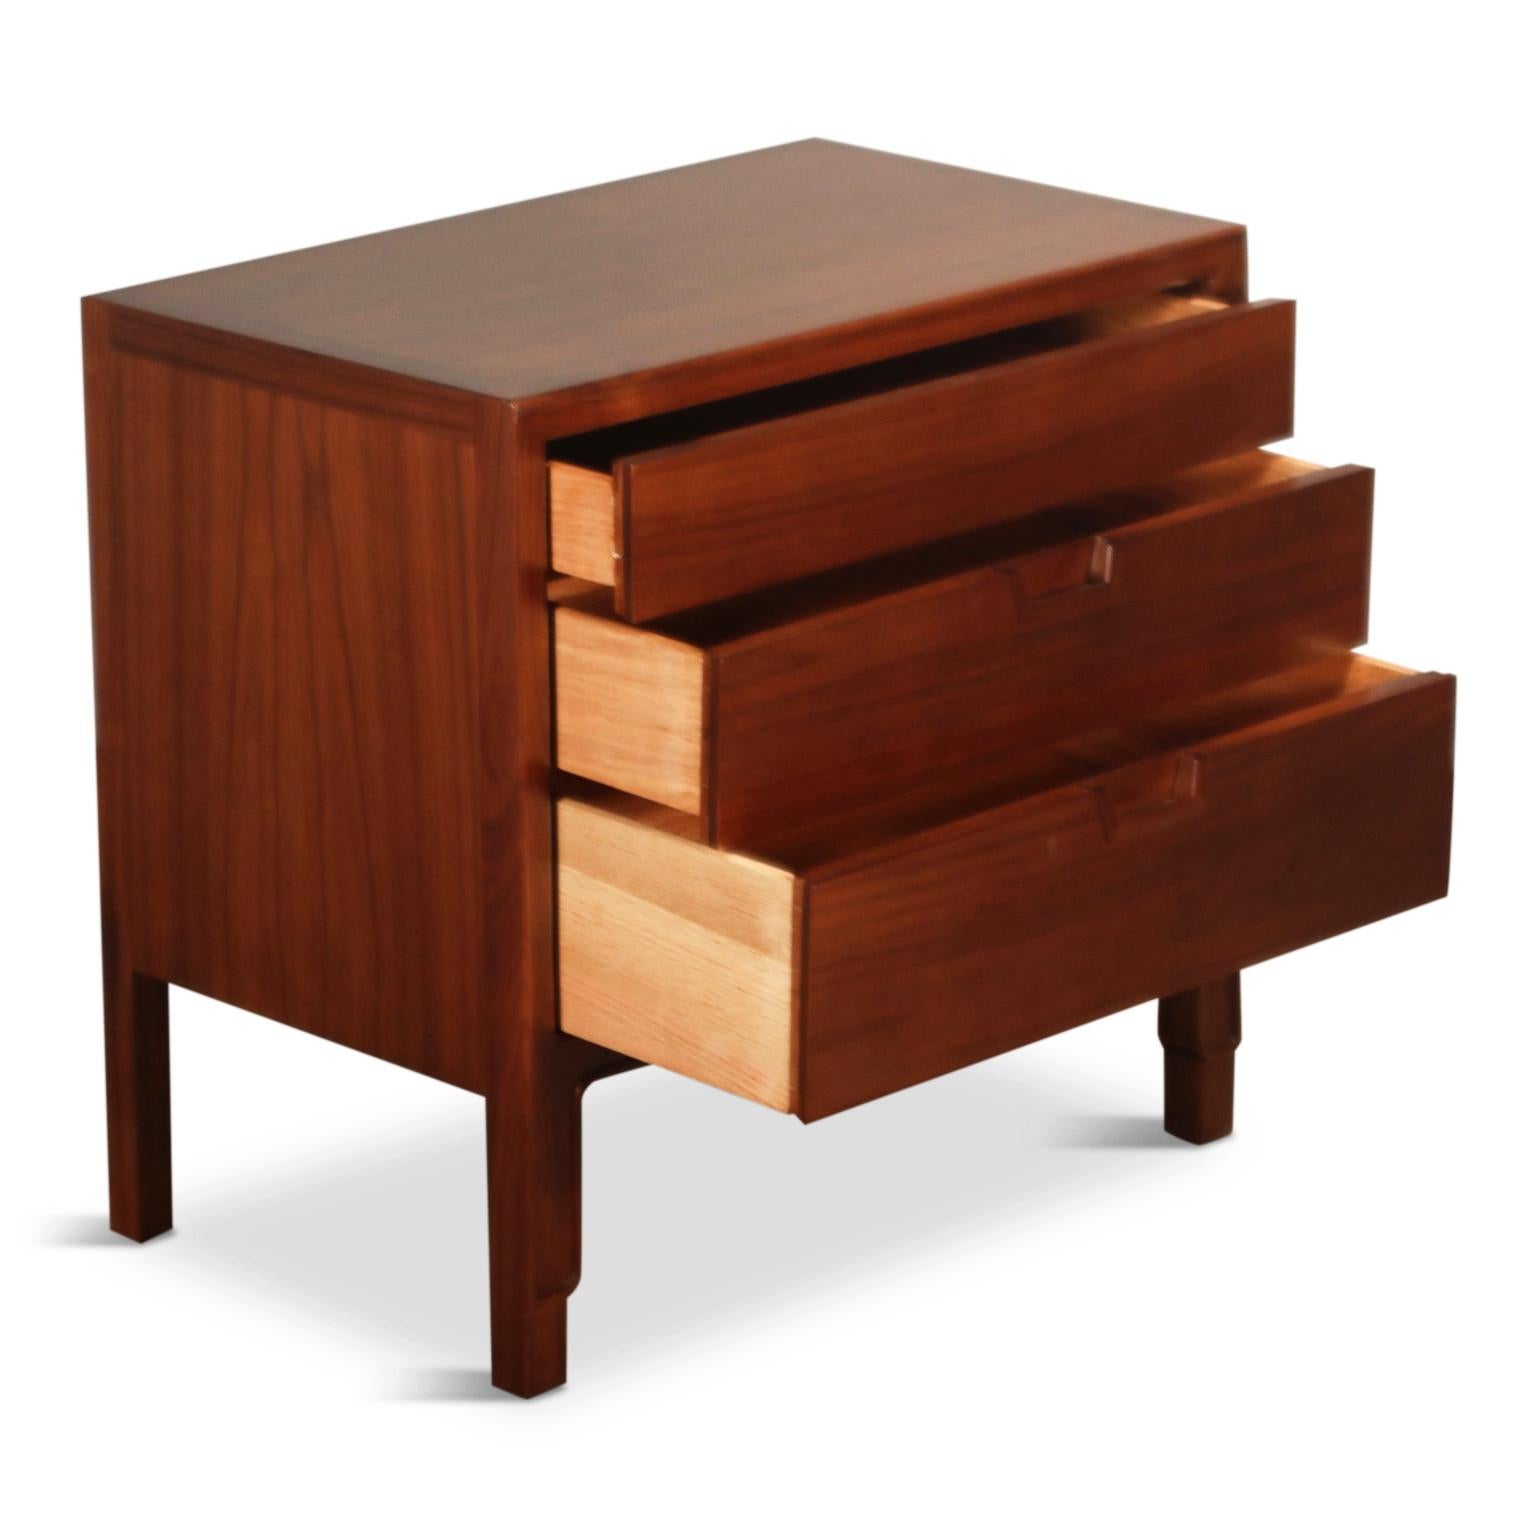 Mid-20th Century Pair of Refinished Nightstands or End Tables by John Stuart for Janus Collection